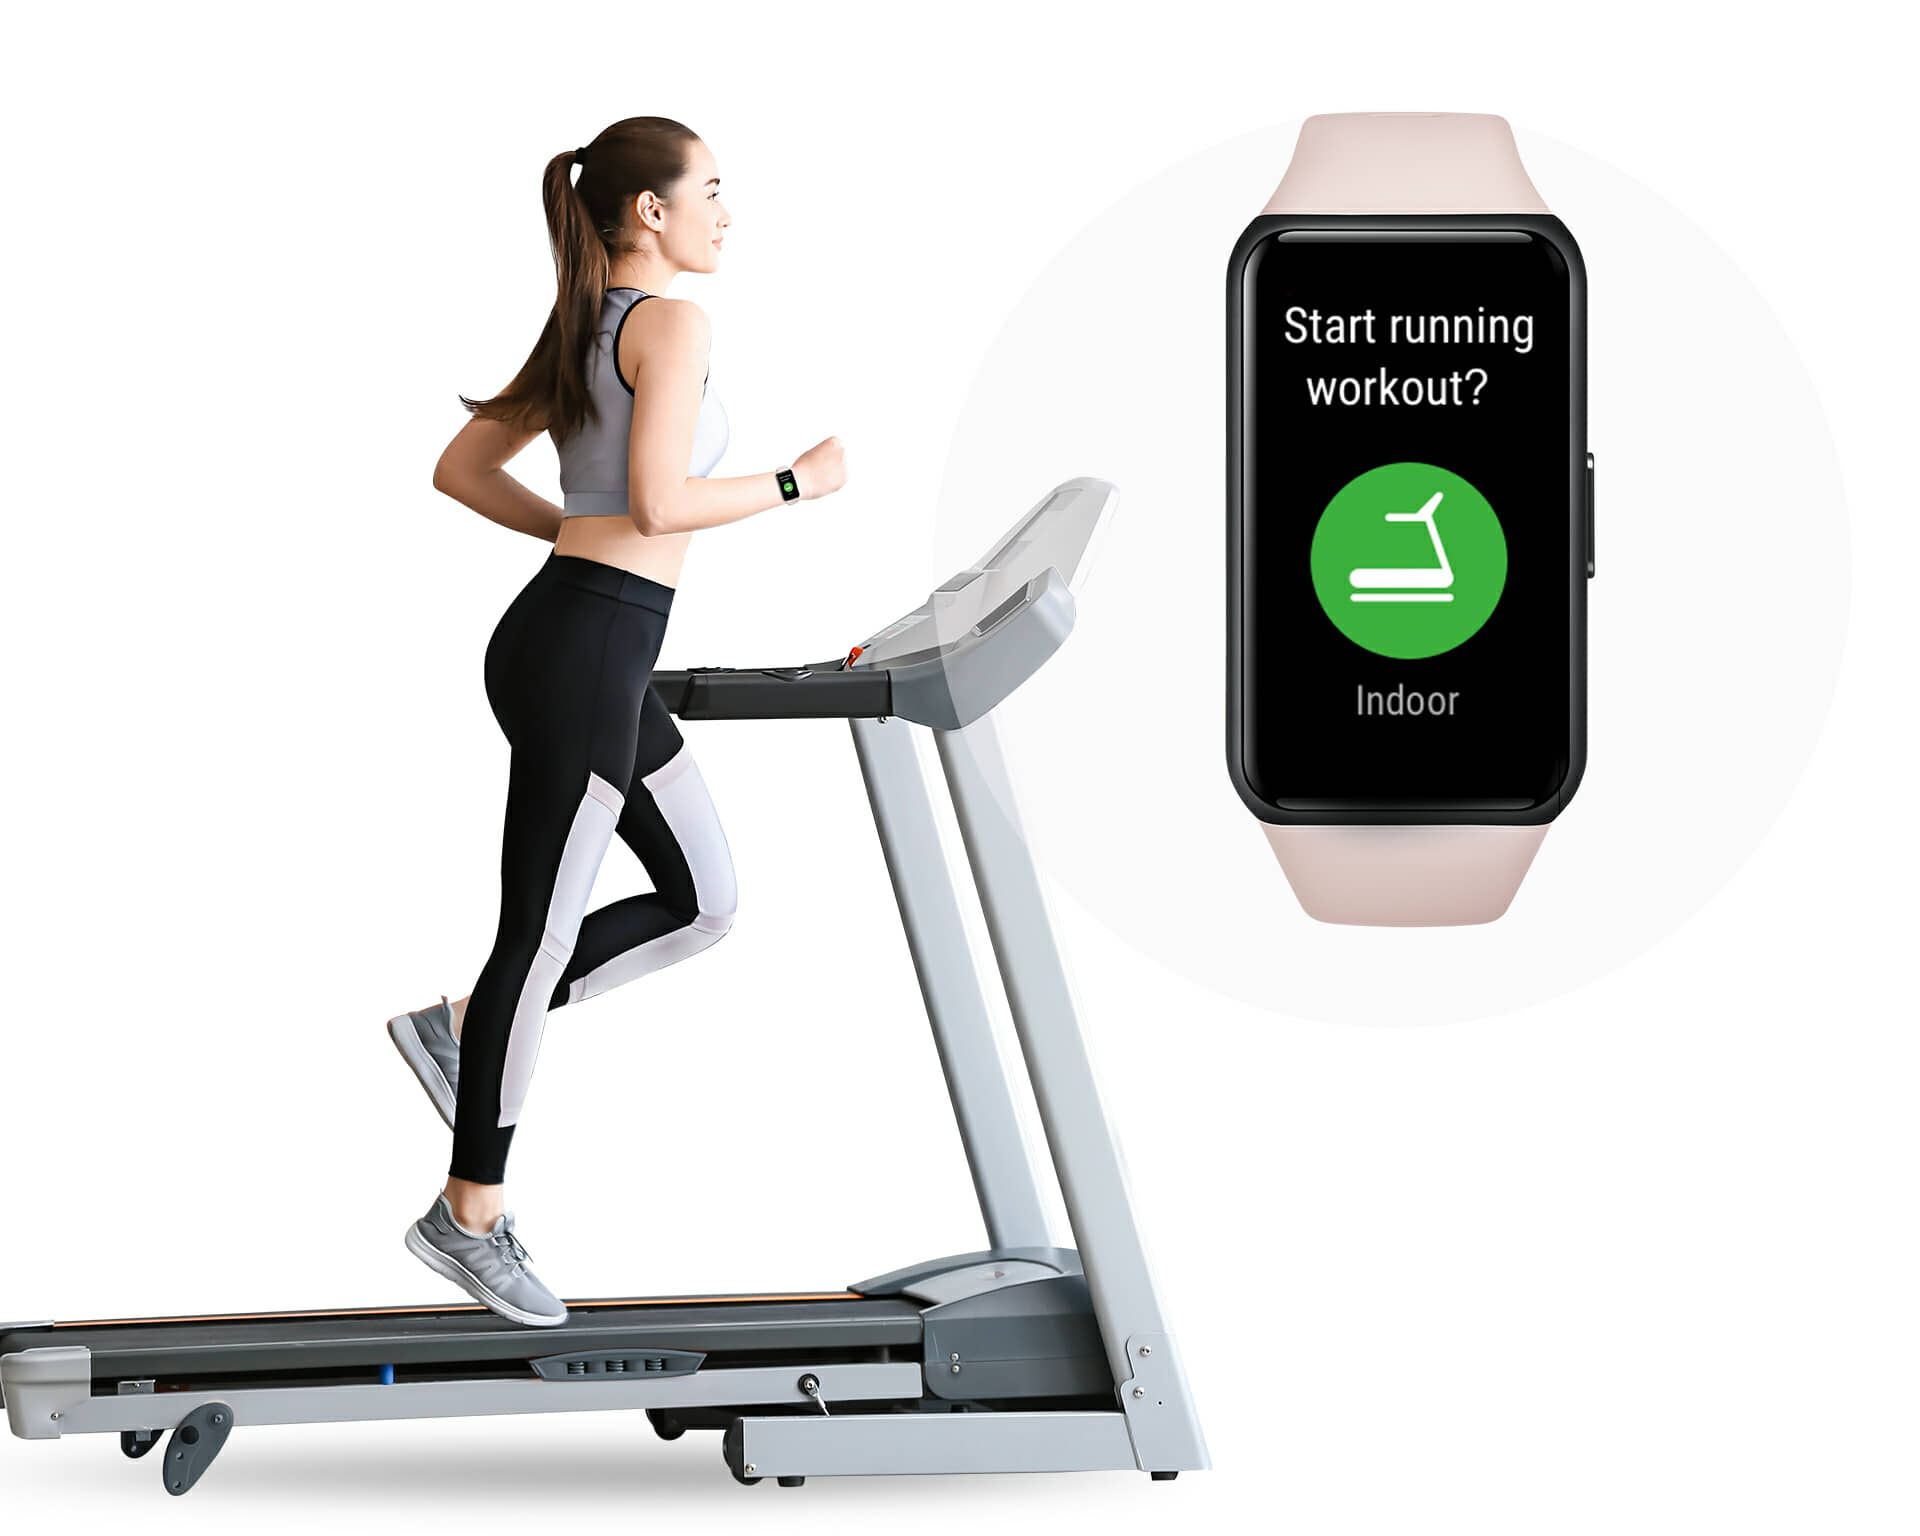 HONOR Band 6 can auto detect 6 workout categories including running, walking, rowing and elliptical